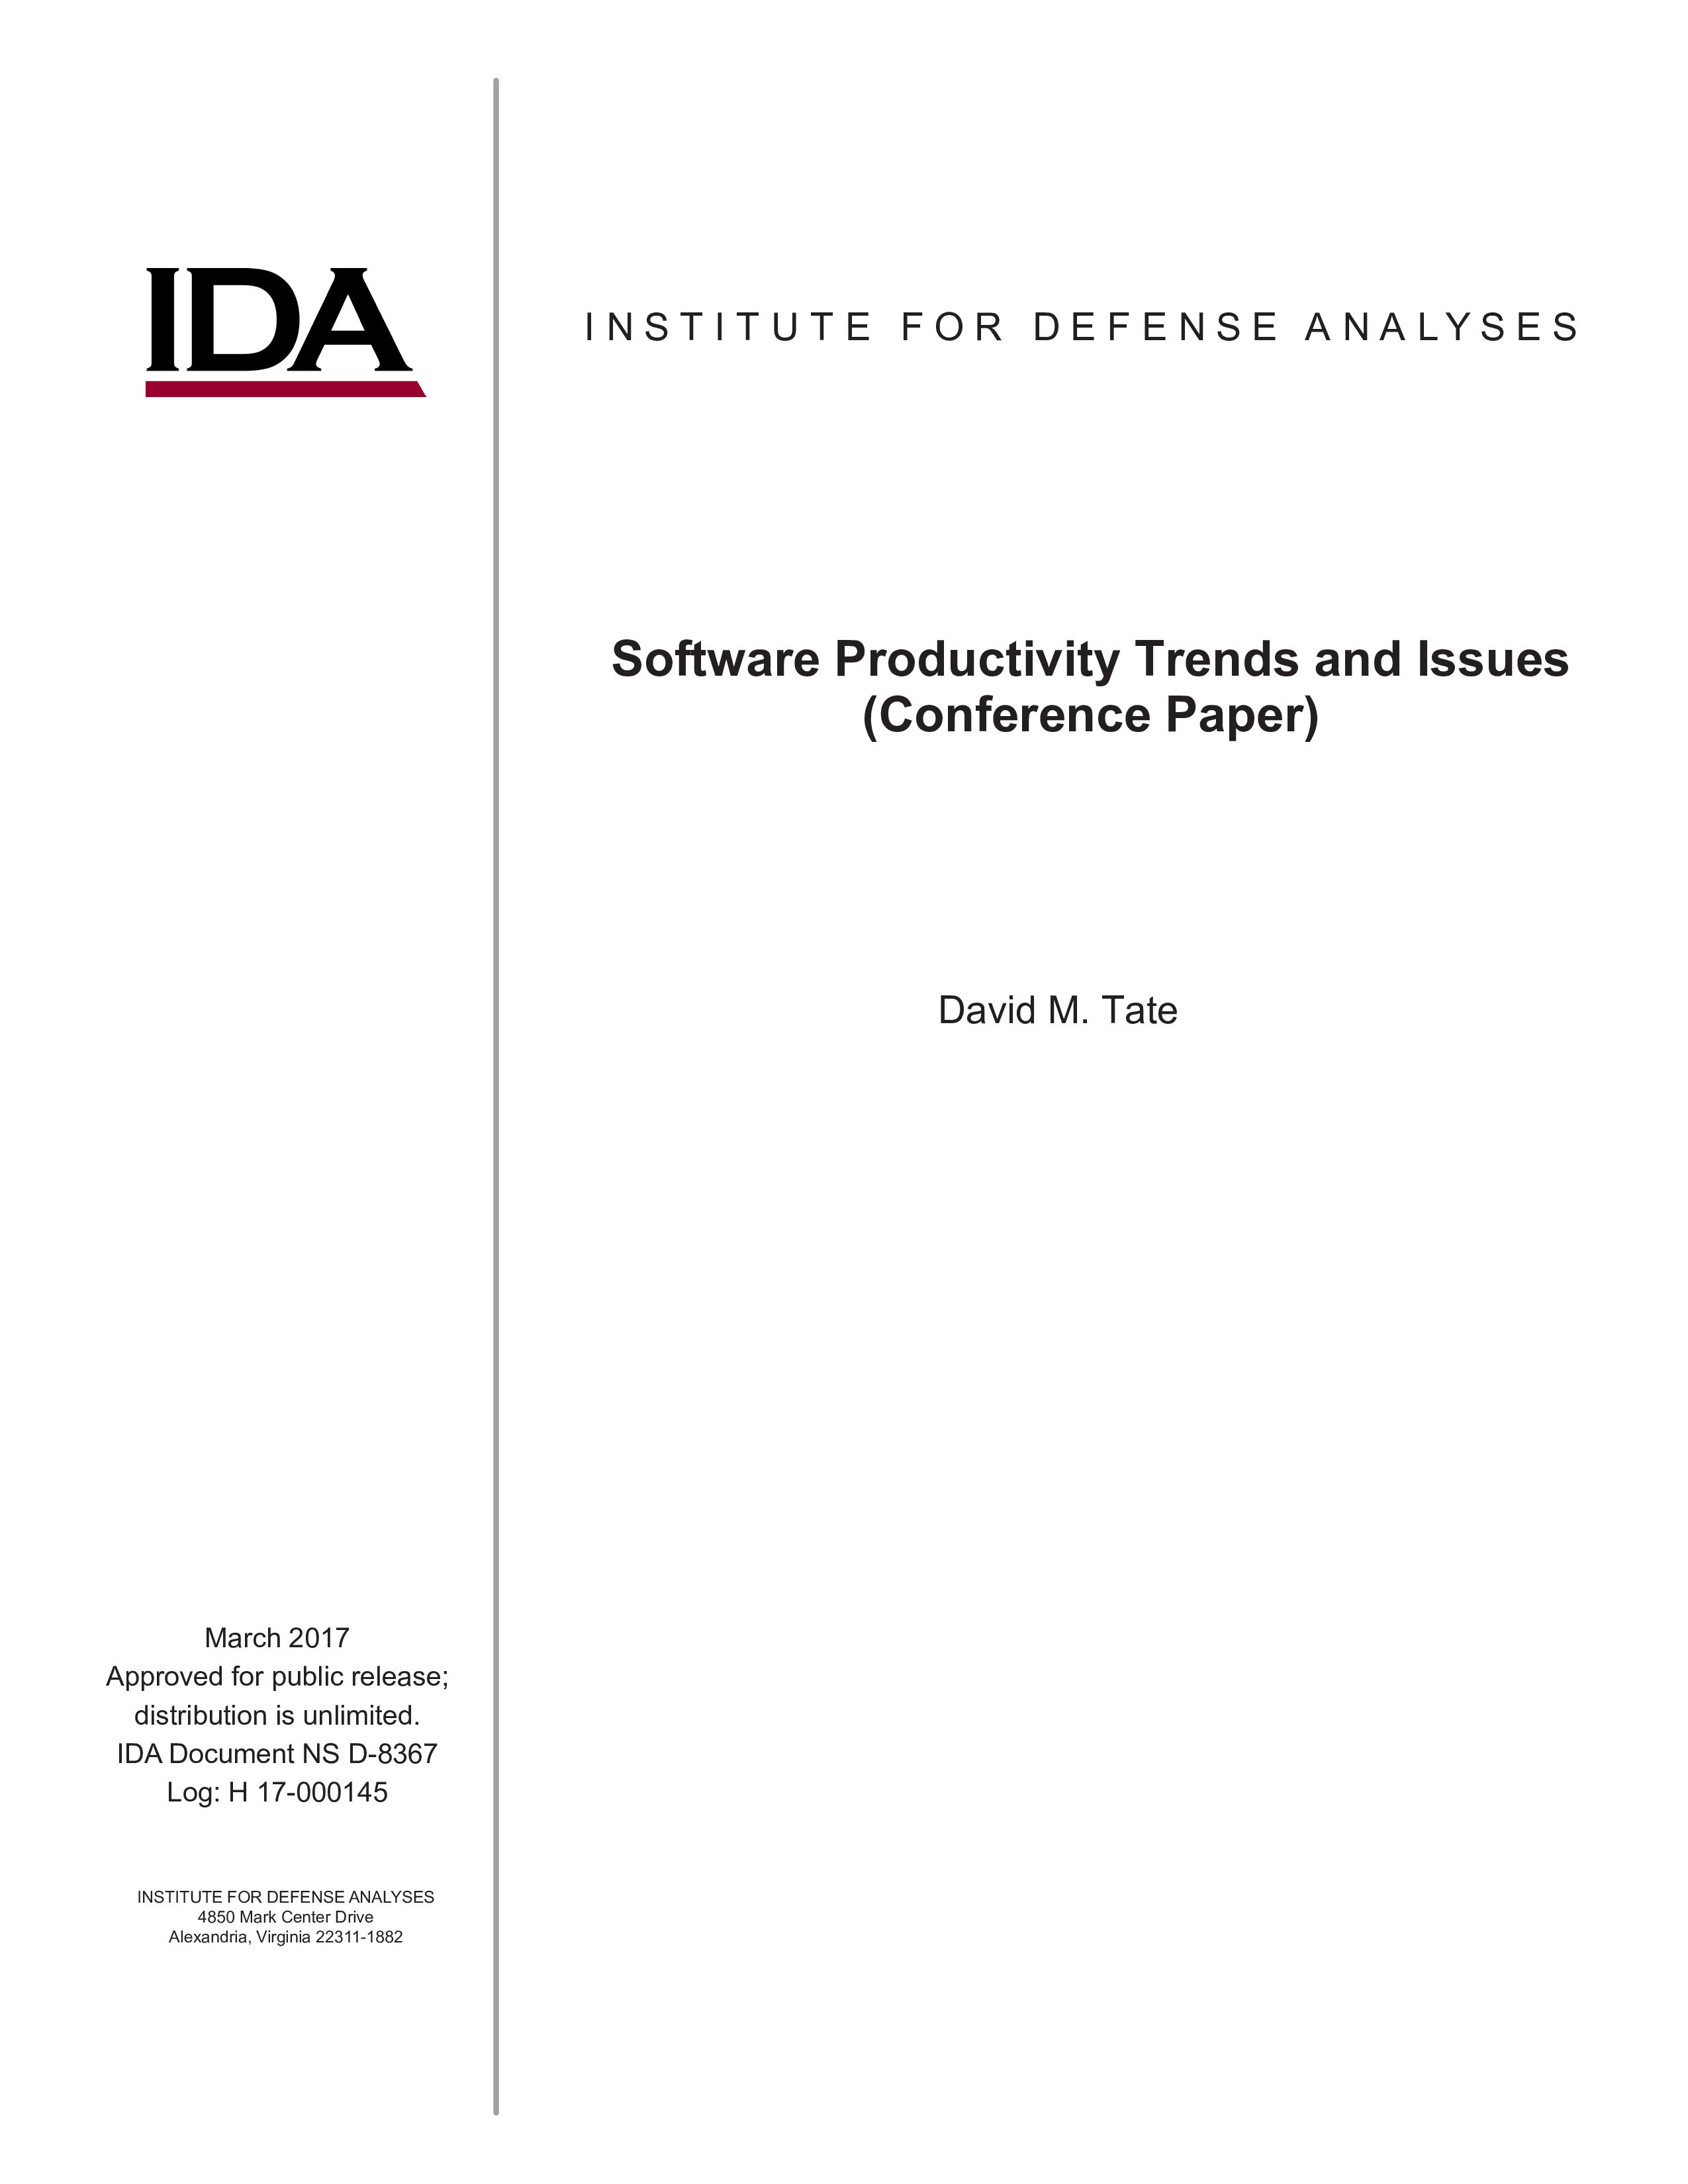 Software Productivity Trends and Issues (Conference Paper)